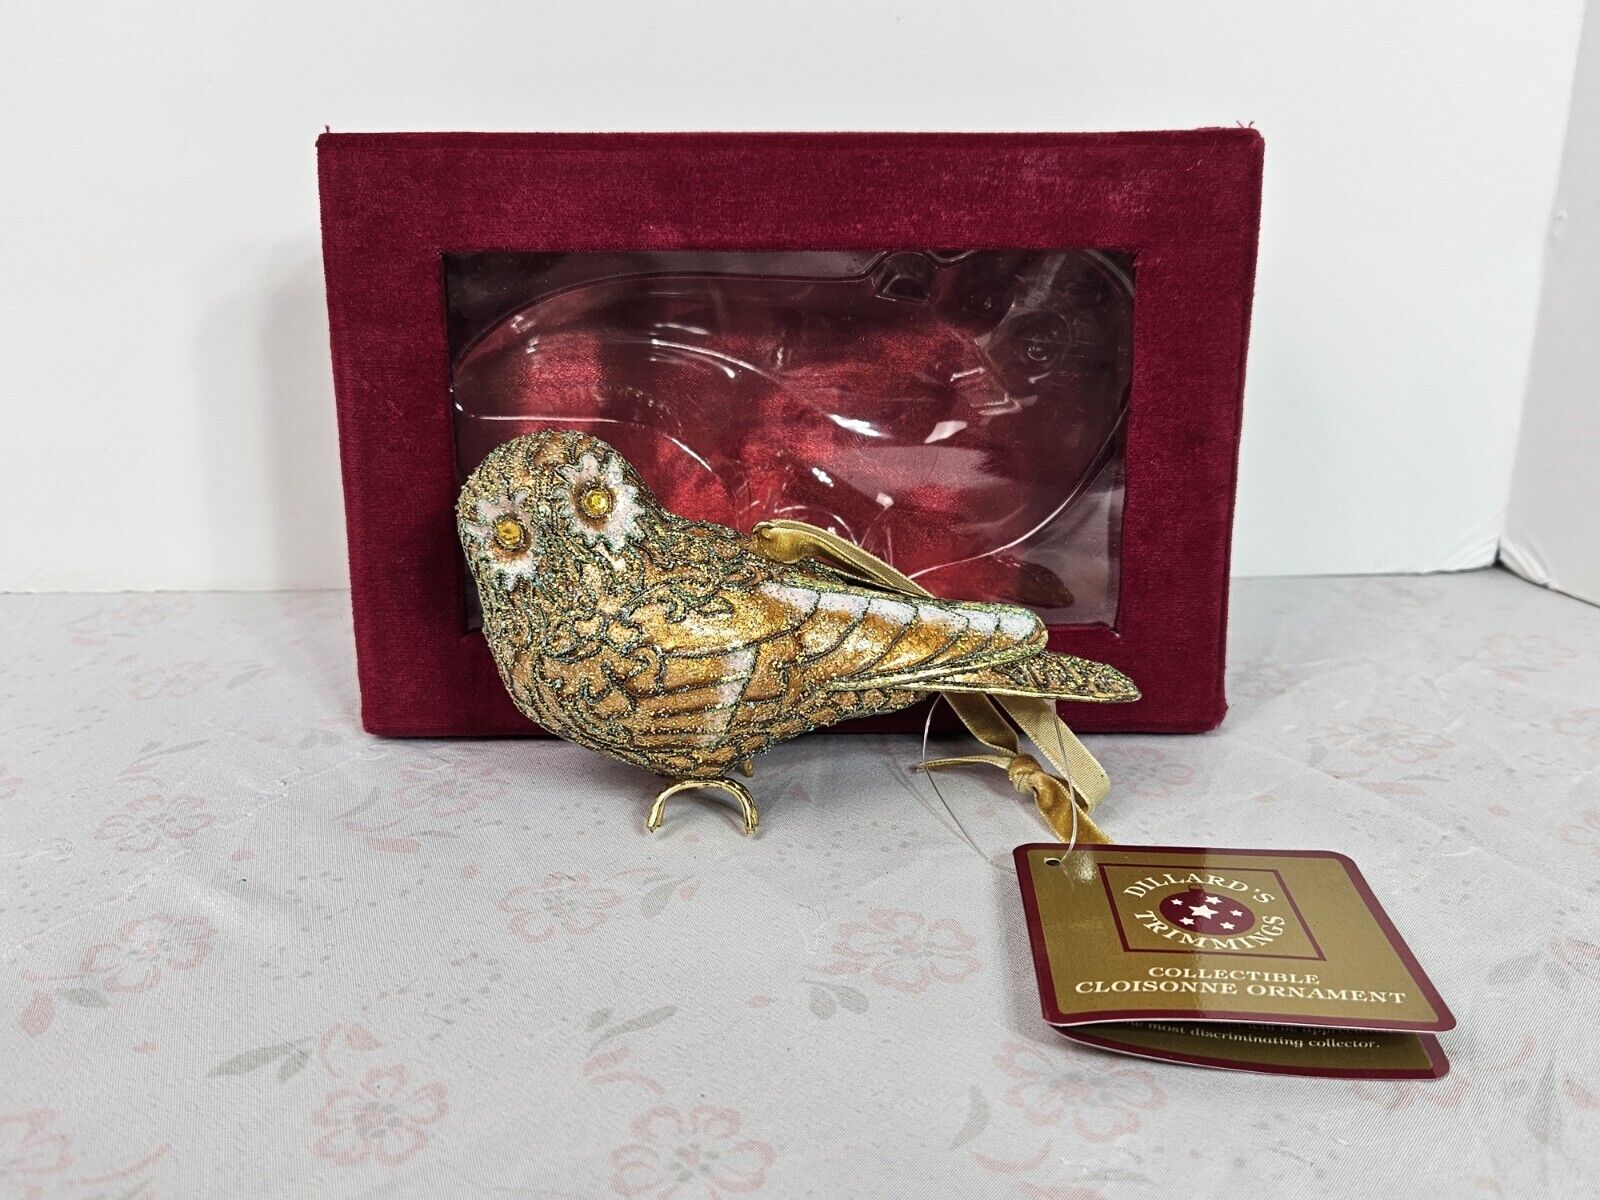  Vintage Dillards Trimmings Cloissone Owl Ornament With Box